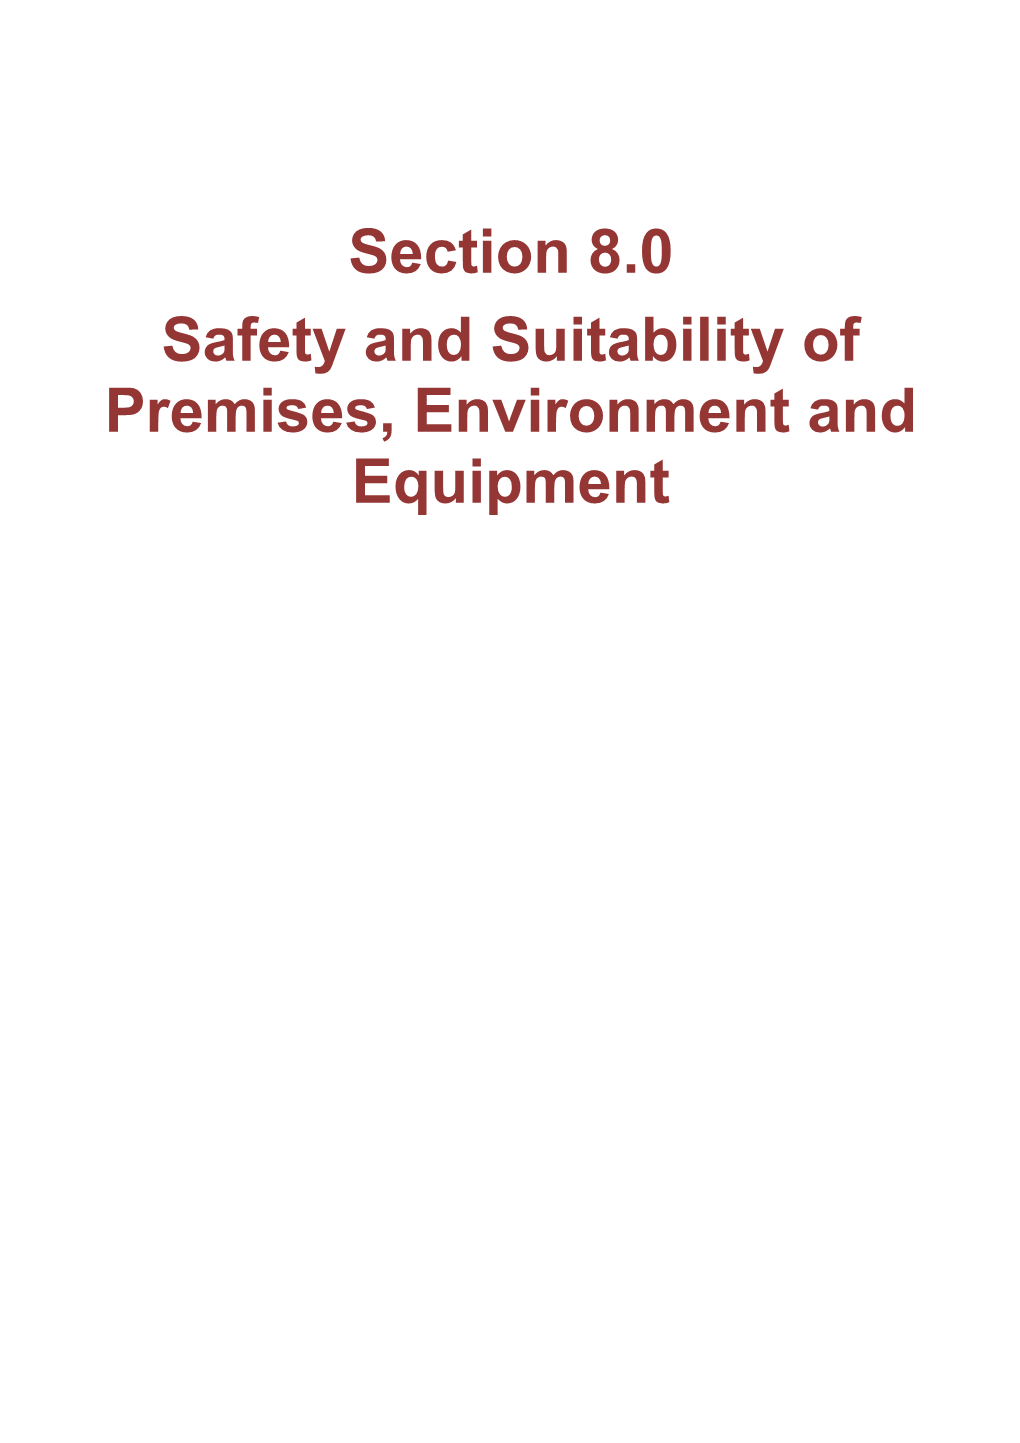 Safety and Suitability of Premises, Environment and Equipment